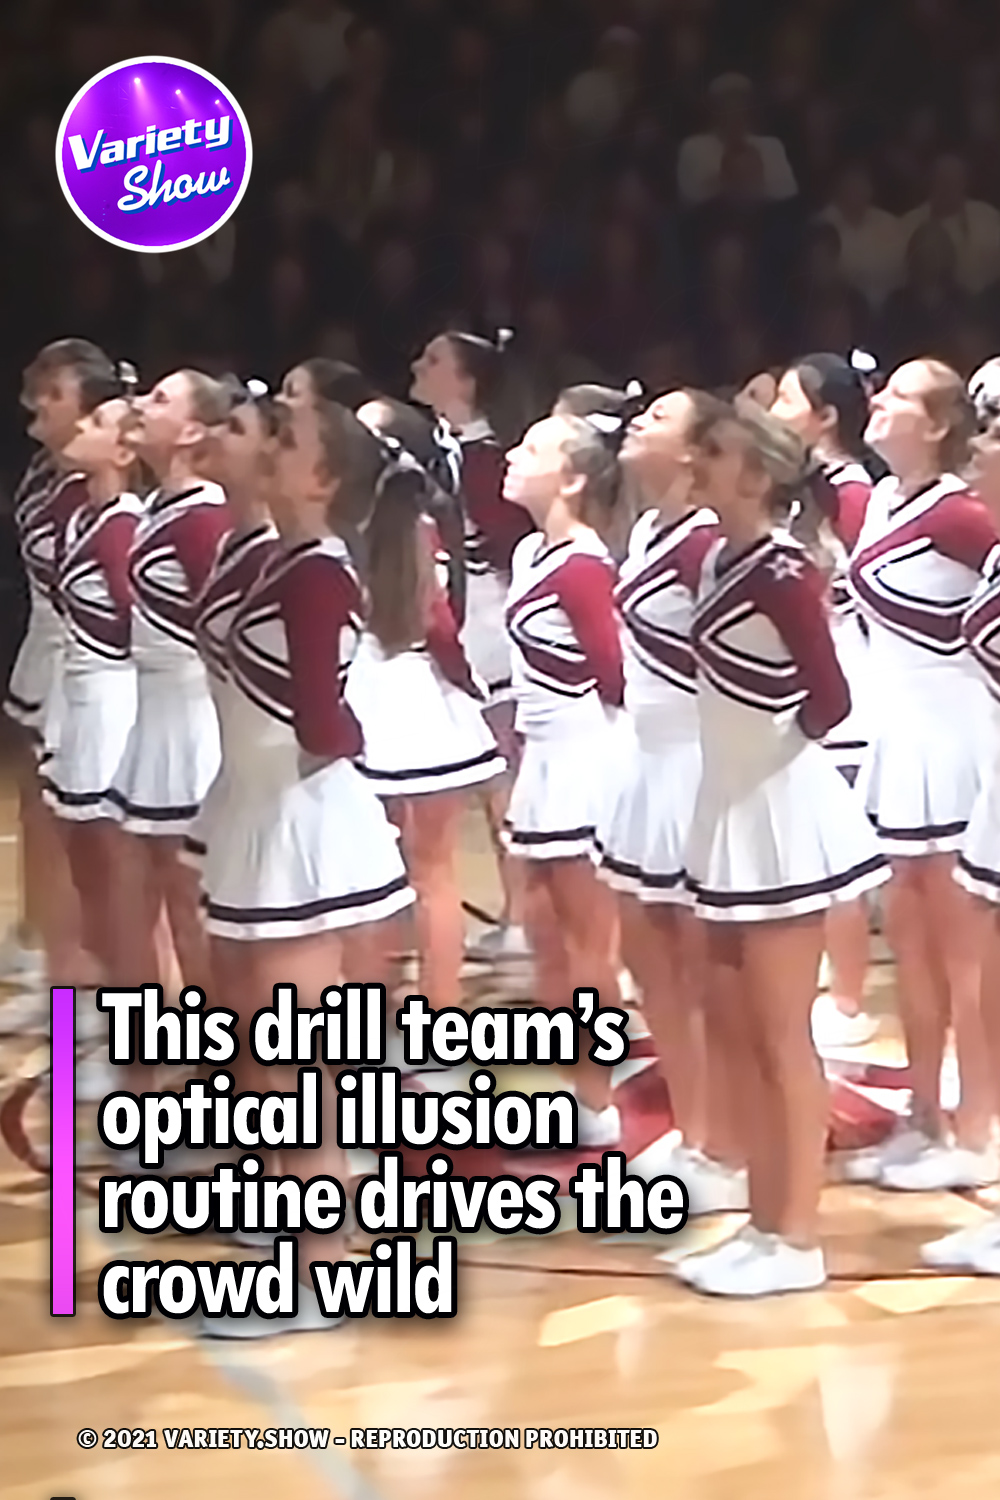 This drill team’s optical illusion routine drives the crowd wild